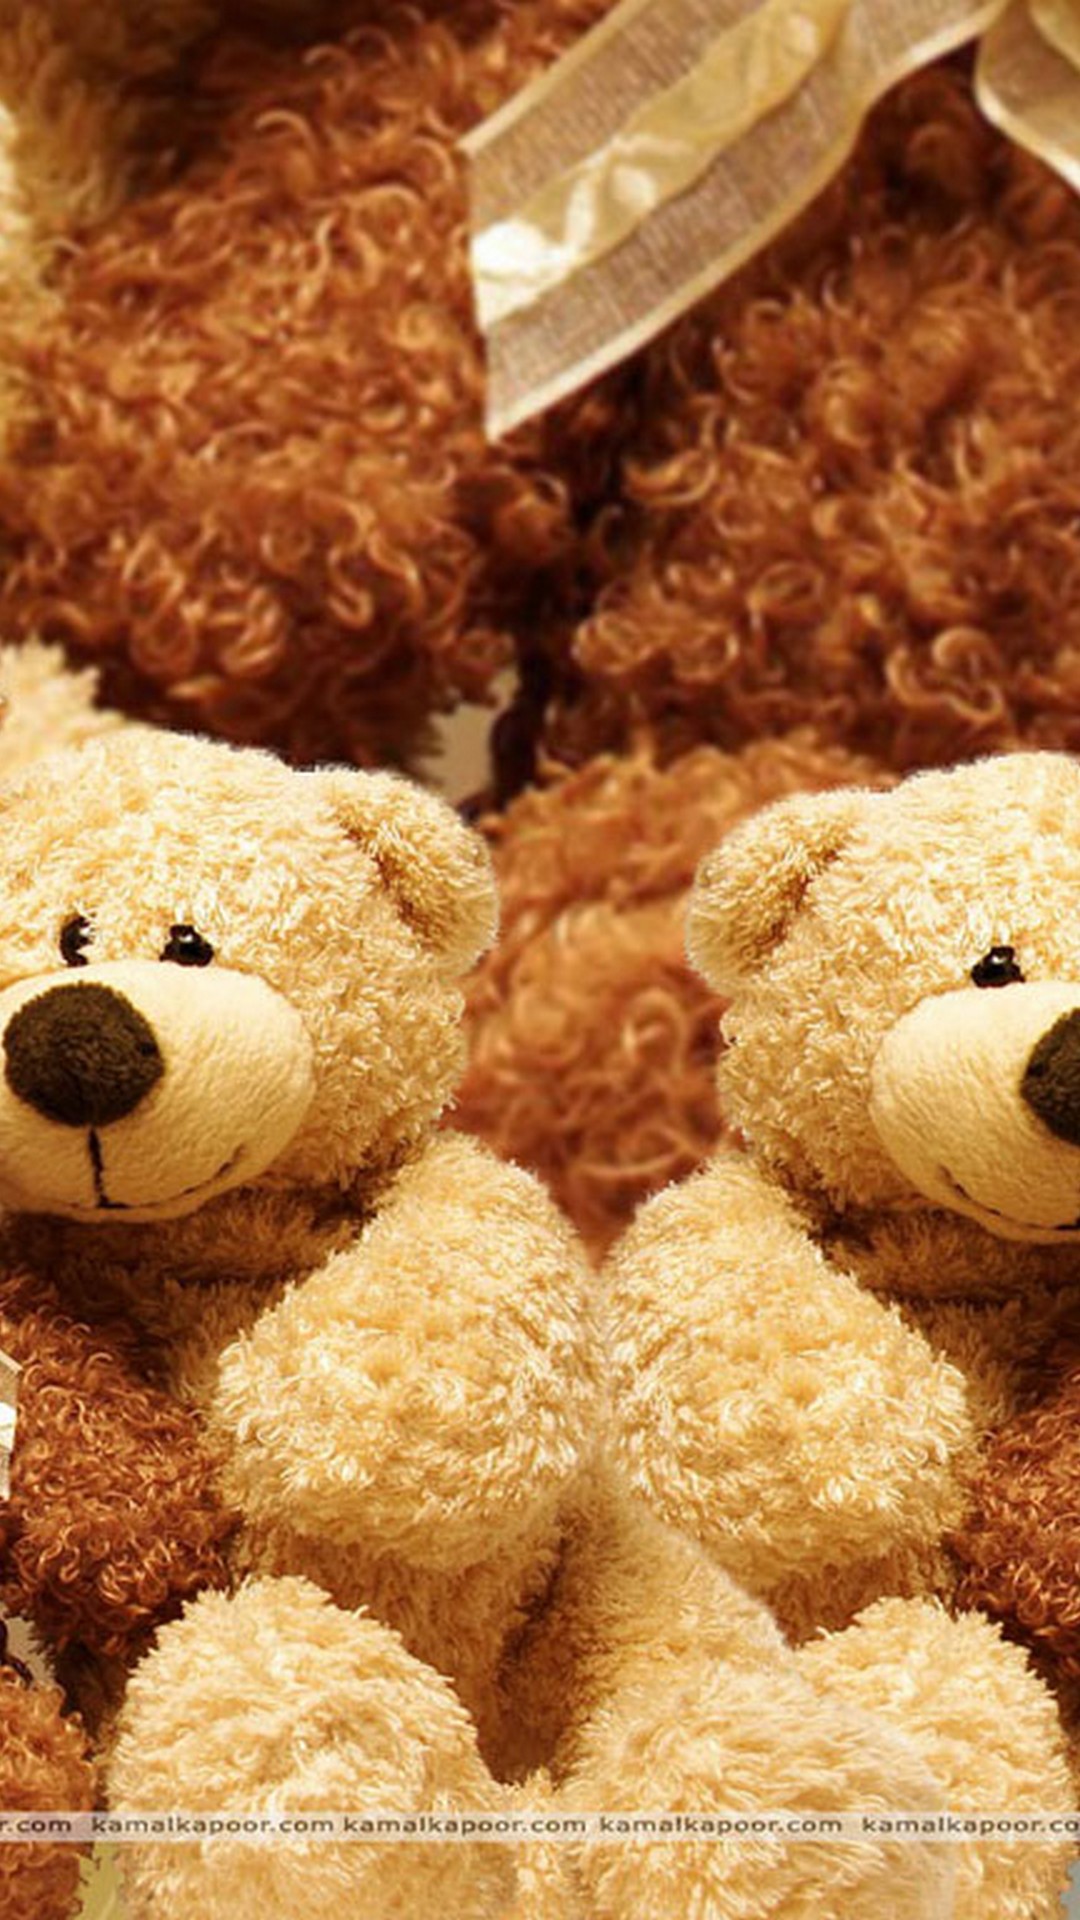 Android Wallpaper Teddy Bear Big with image resolution 1080x1920 pixel. You can make this wallpaper for your Android backgrounds, Tablet, Smartphones Screensavers and Mobile Phone Lock Screen